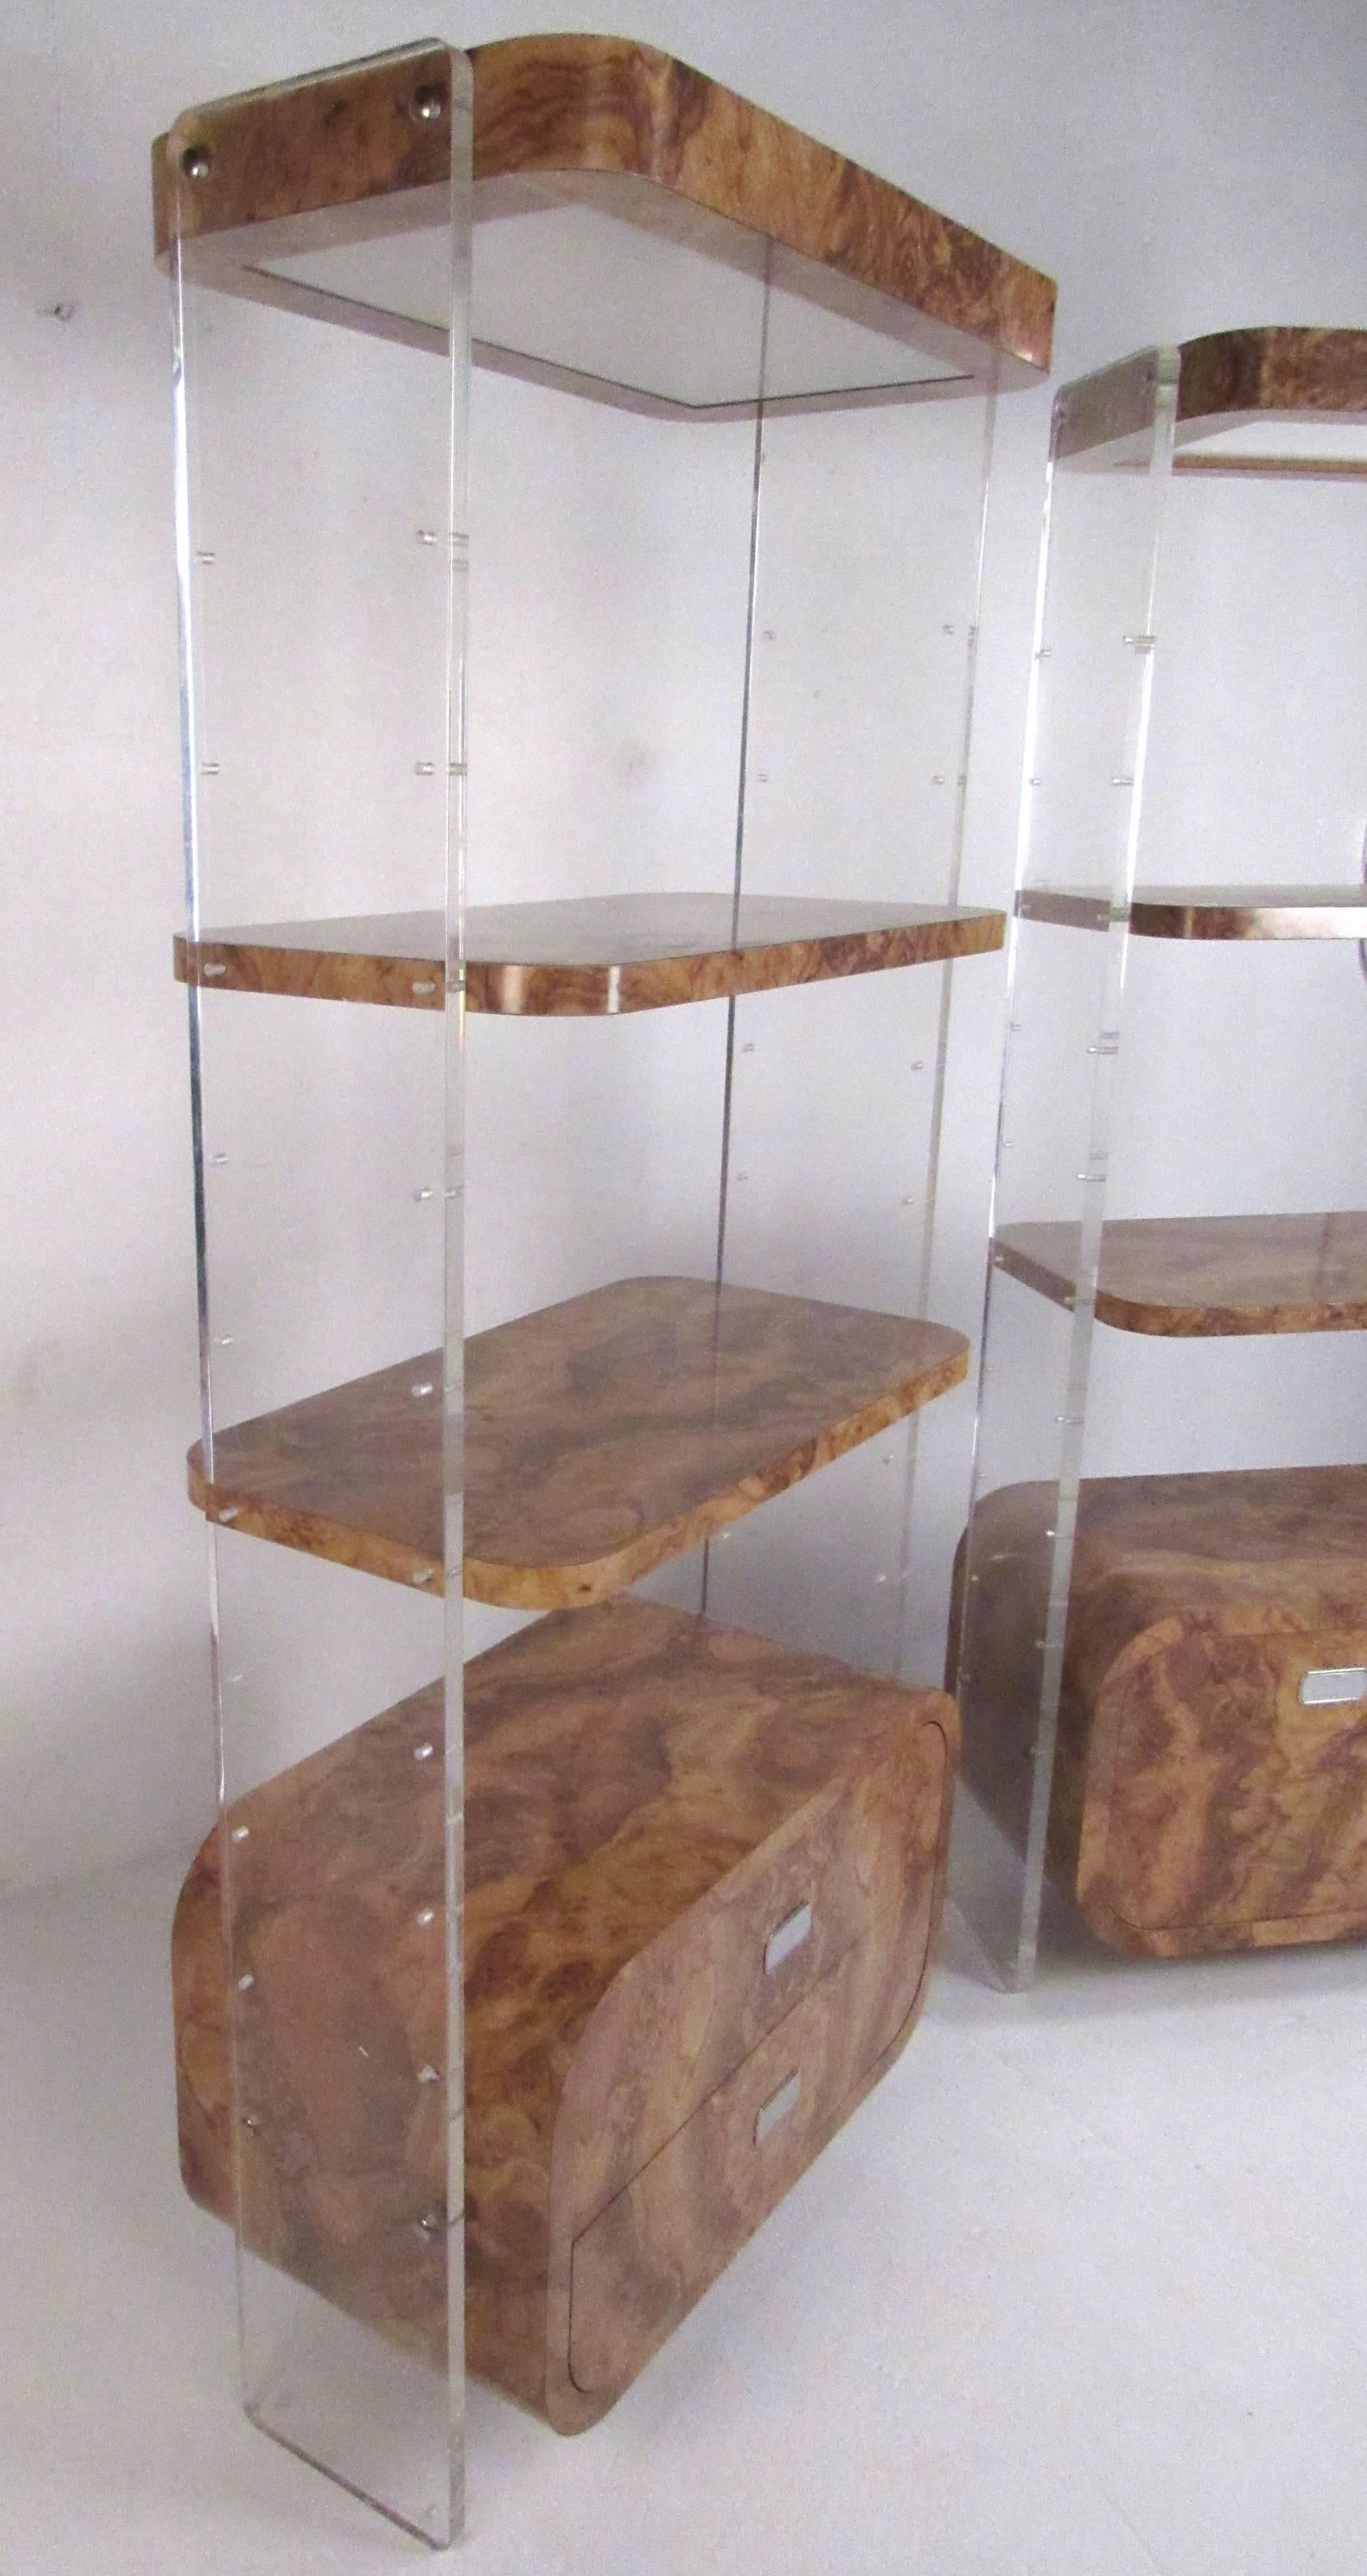 Pair of 1970s Lucite and faux burl wood display shelves with storage units and canopy lights. Each mid-century modern burlwood unit consists of two adjustable shelves, overhead lights and storage cabinet supported by 1' thick Lucite uprights.